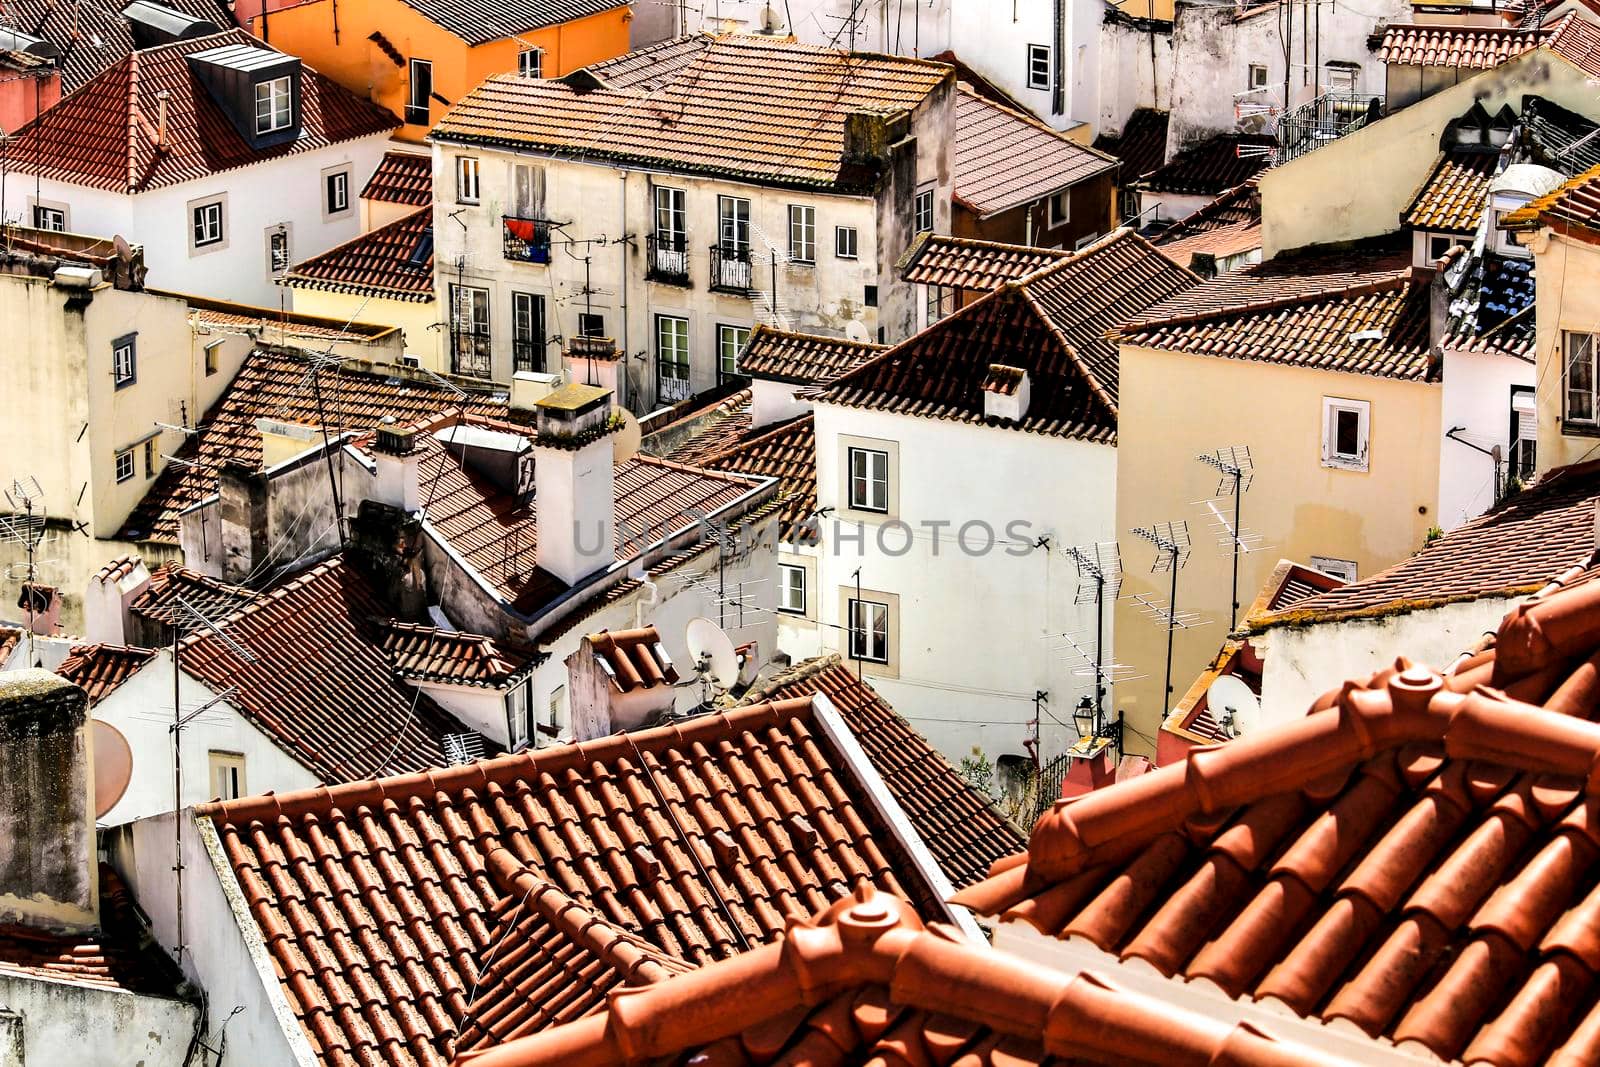 Alfama neighborhood from the viewpoint of Santa Lucia by soniabonet